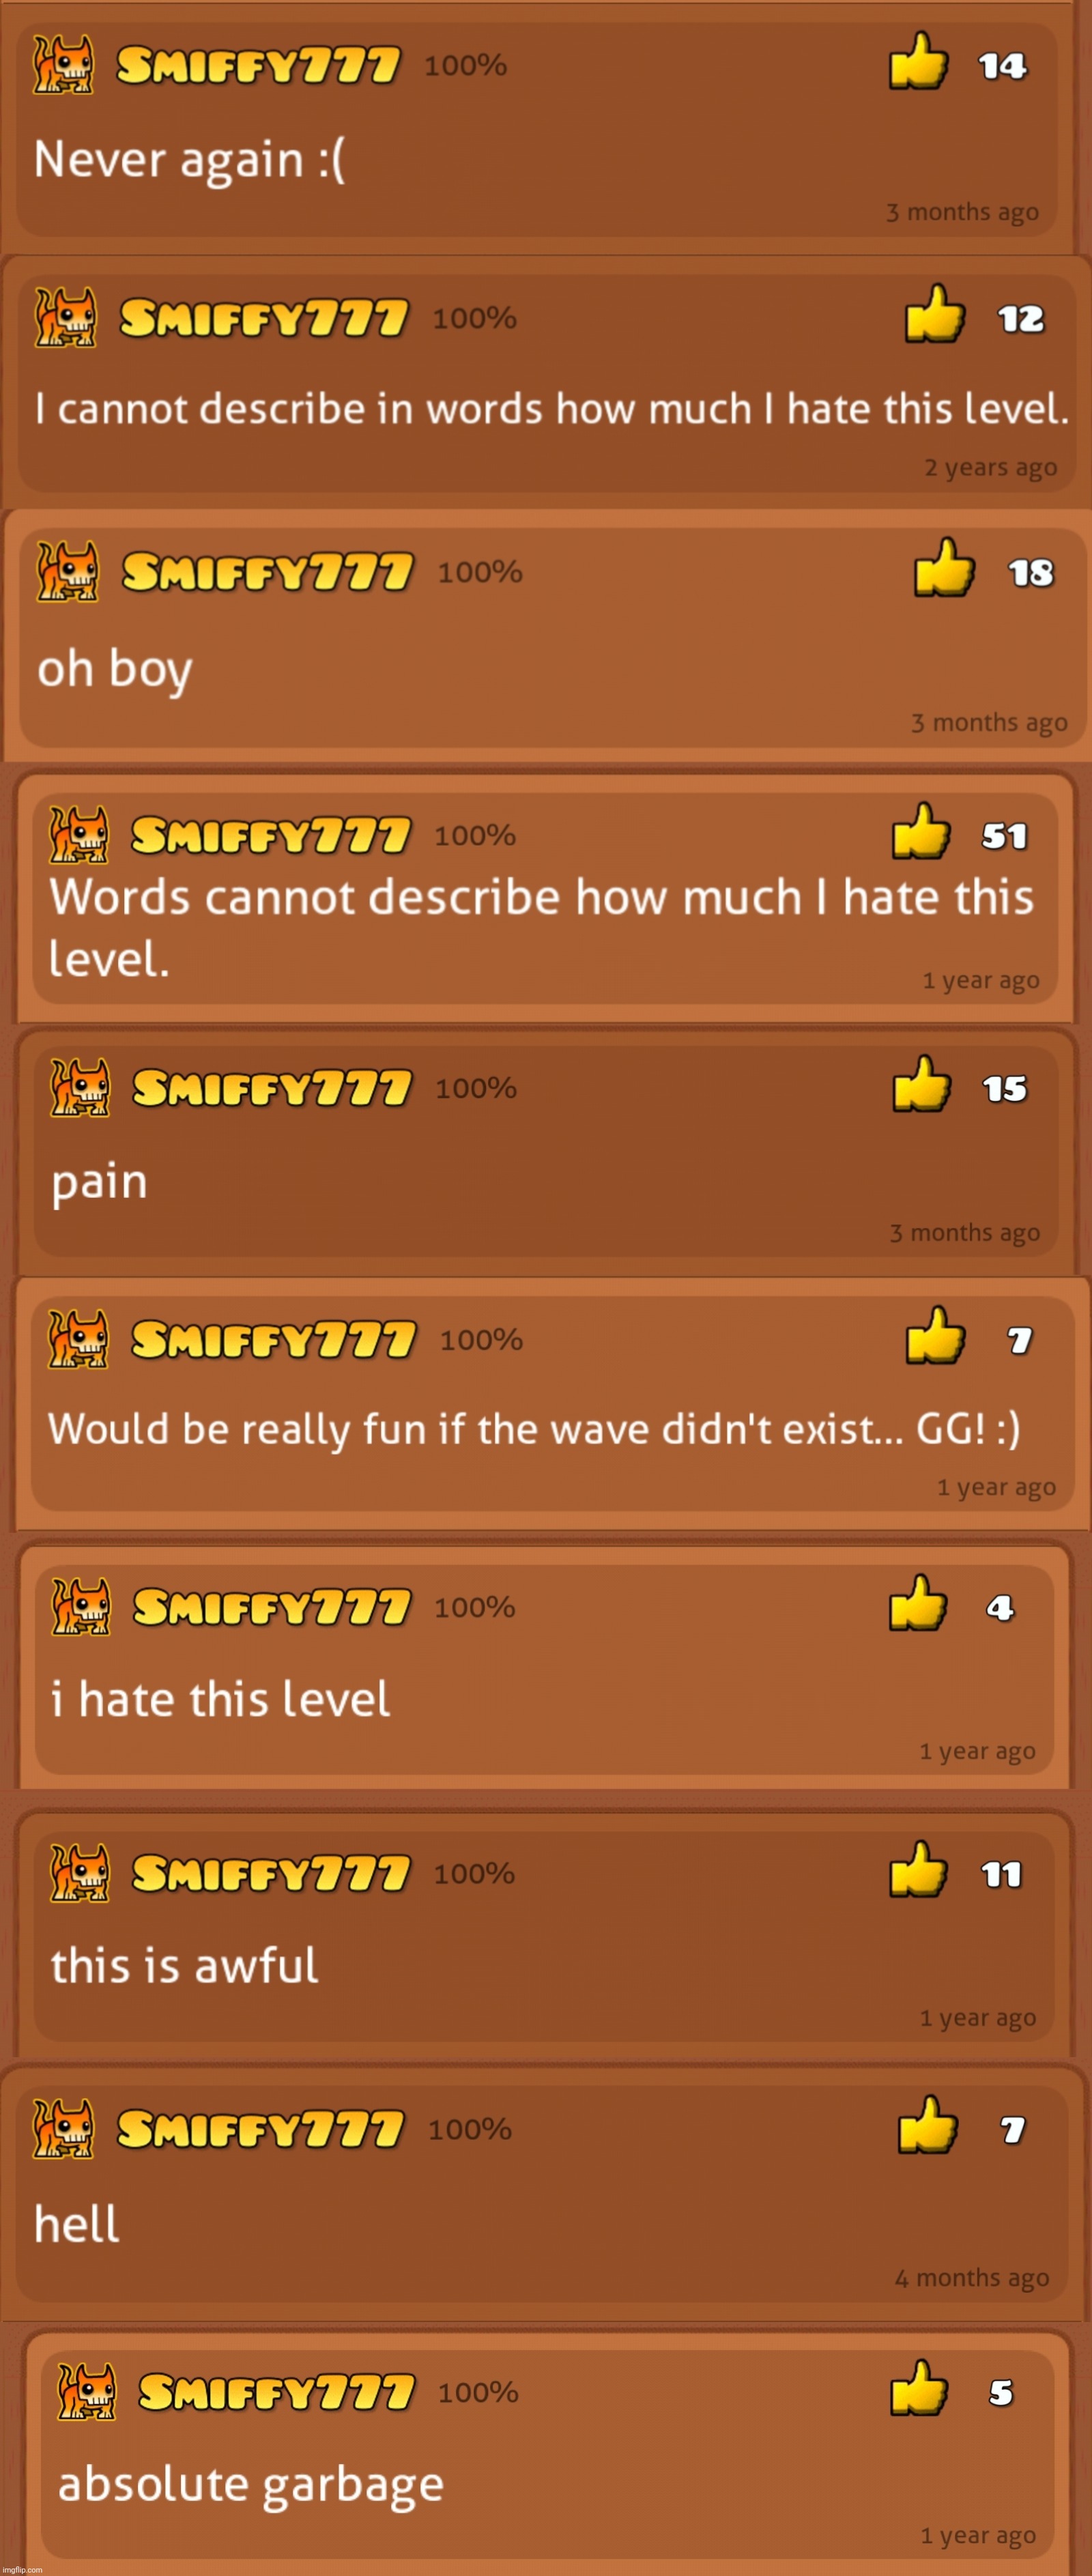 I absolutely f**king hate this level. | image tagged in memes,geometry dash,smiffy777 | made w/ Imgflip meme maker